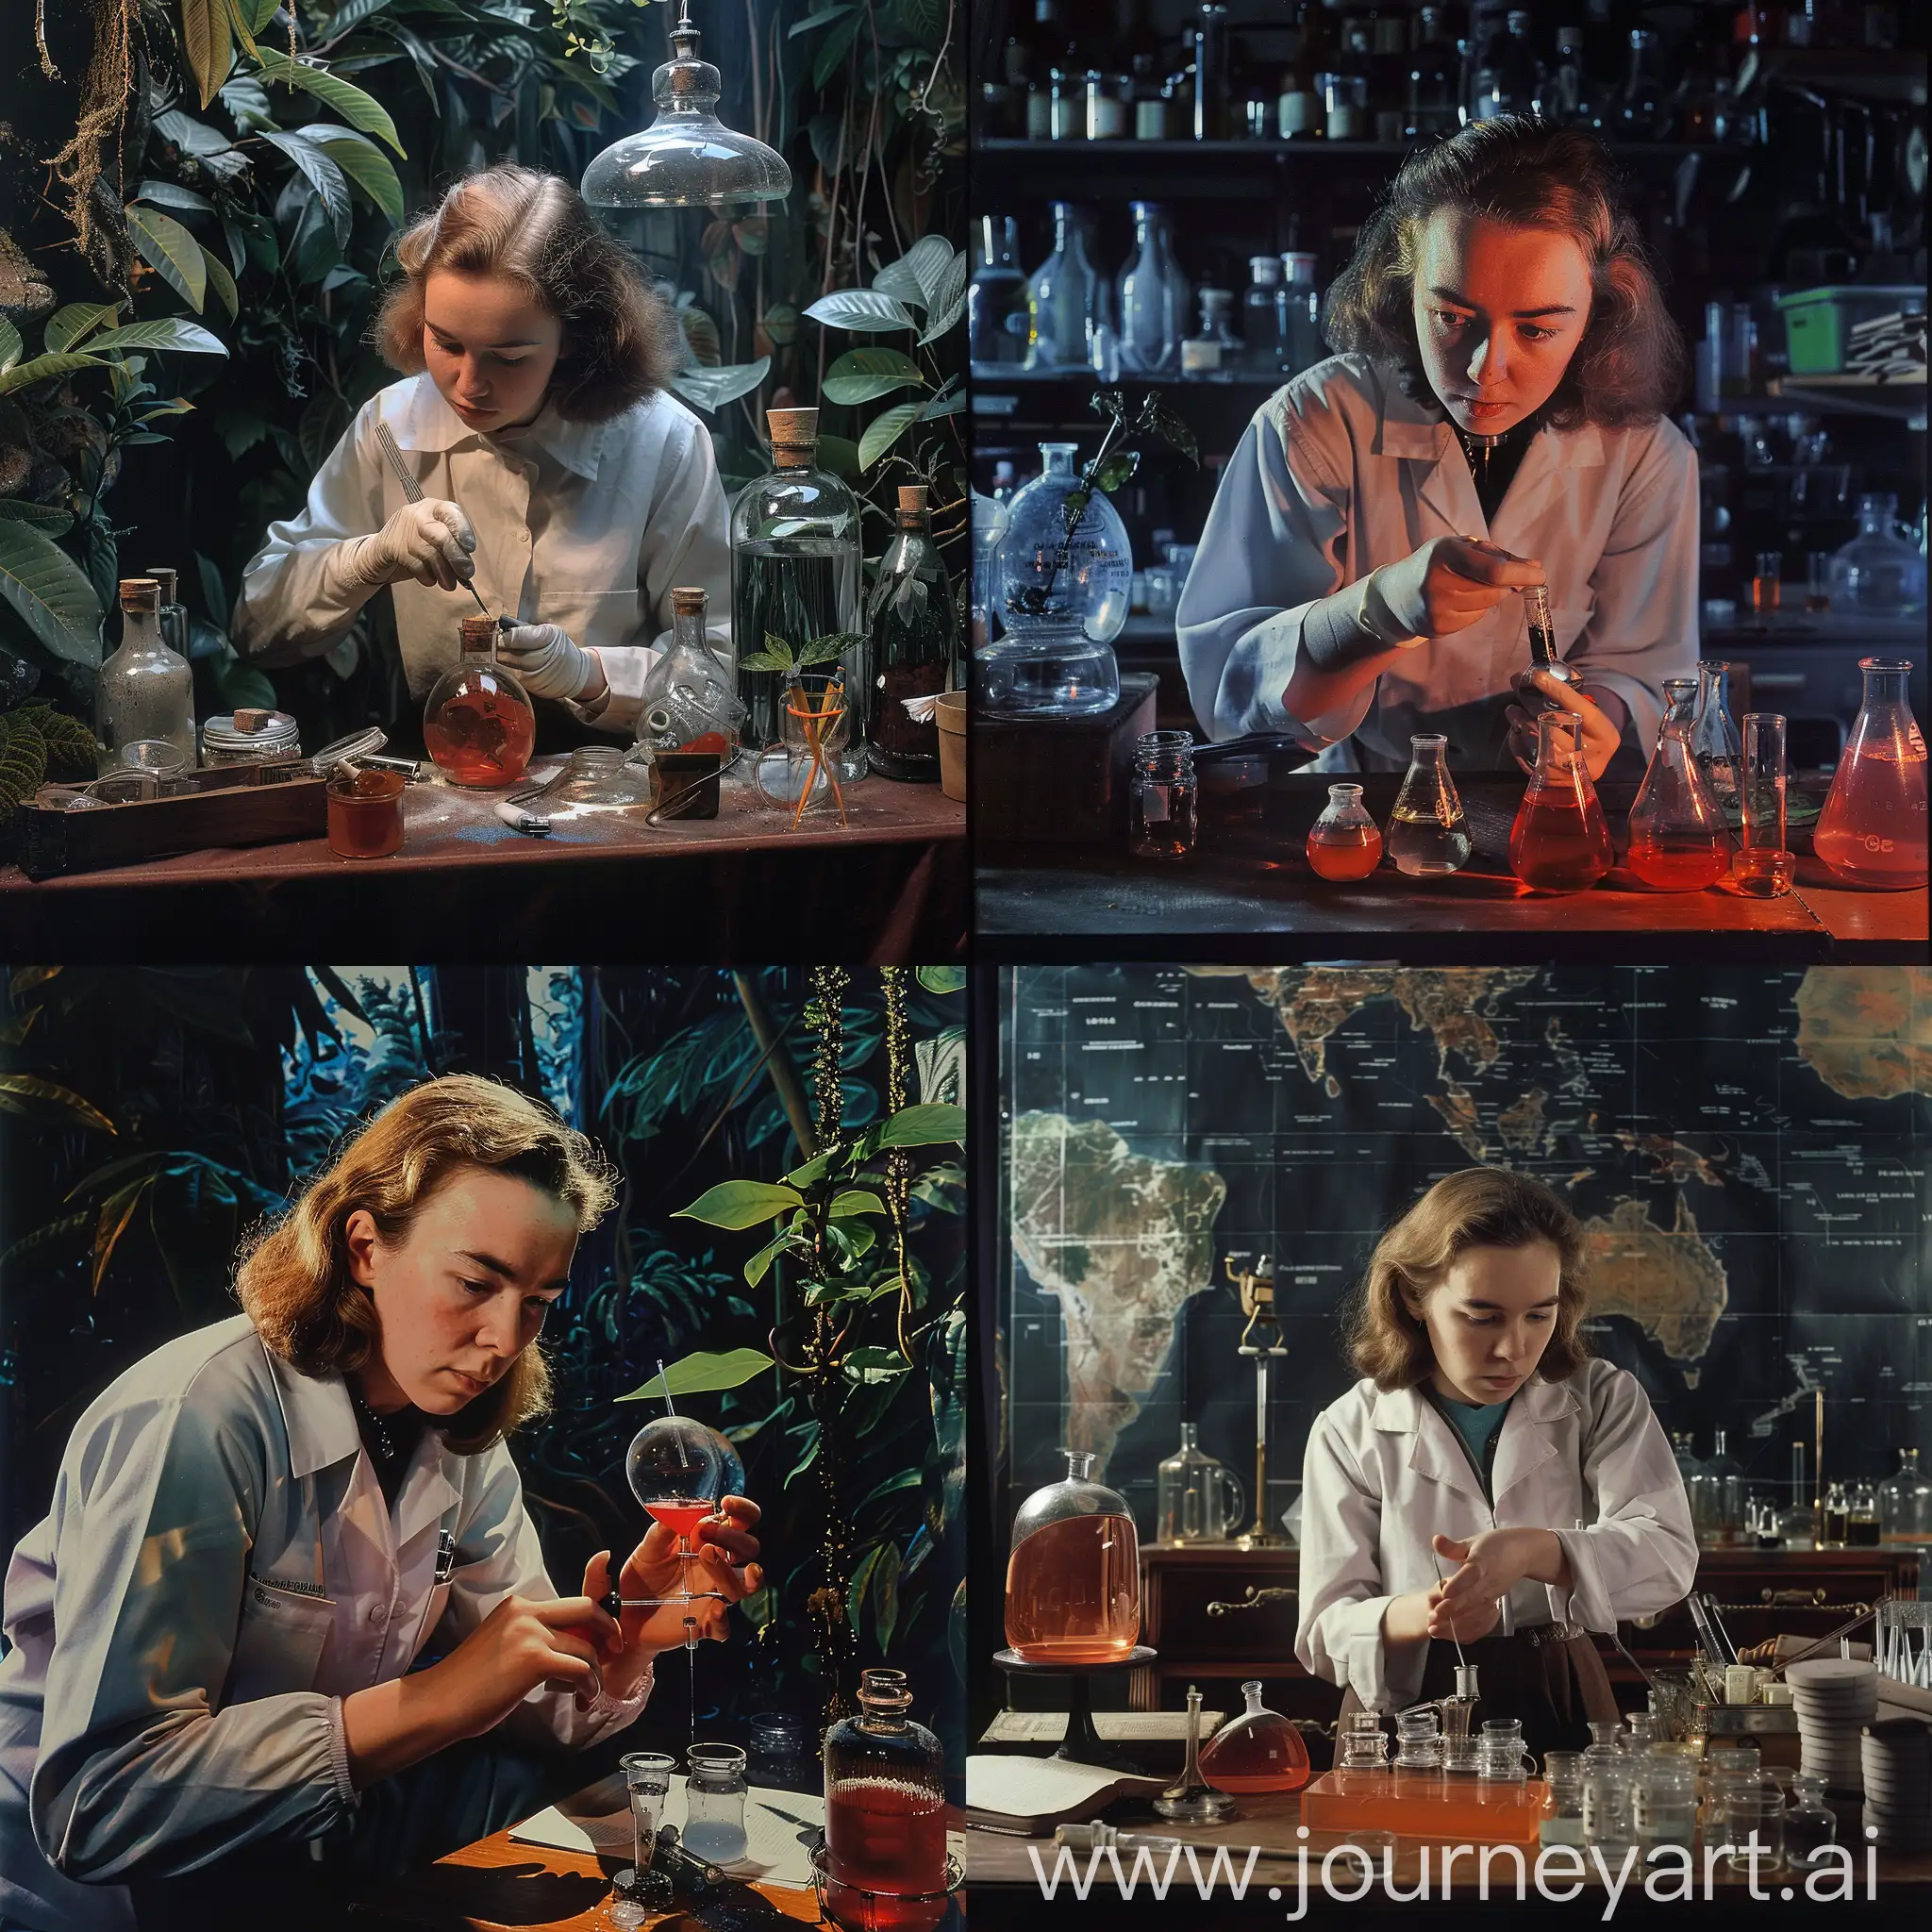 South-American-Scientist-Experimenting-in-1988-Hyper-Realism-Photo